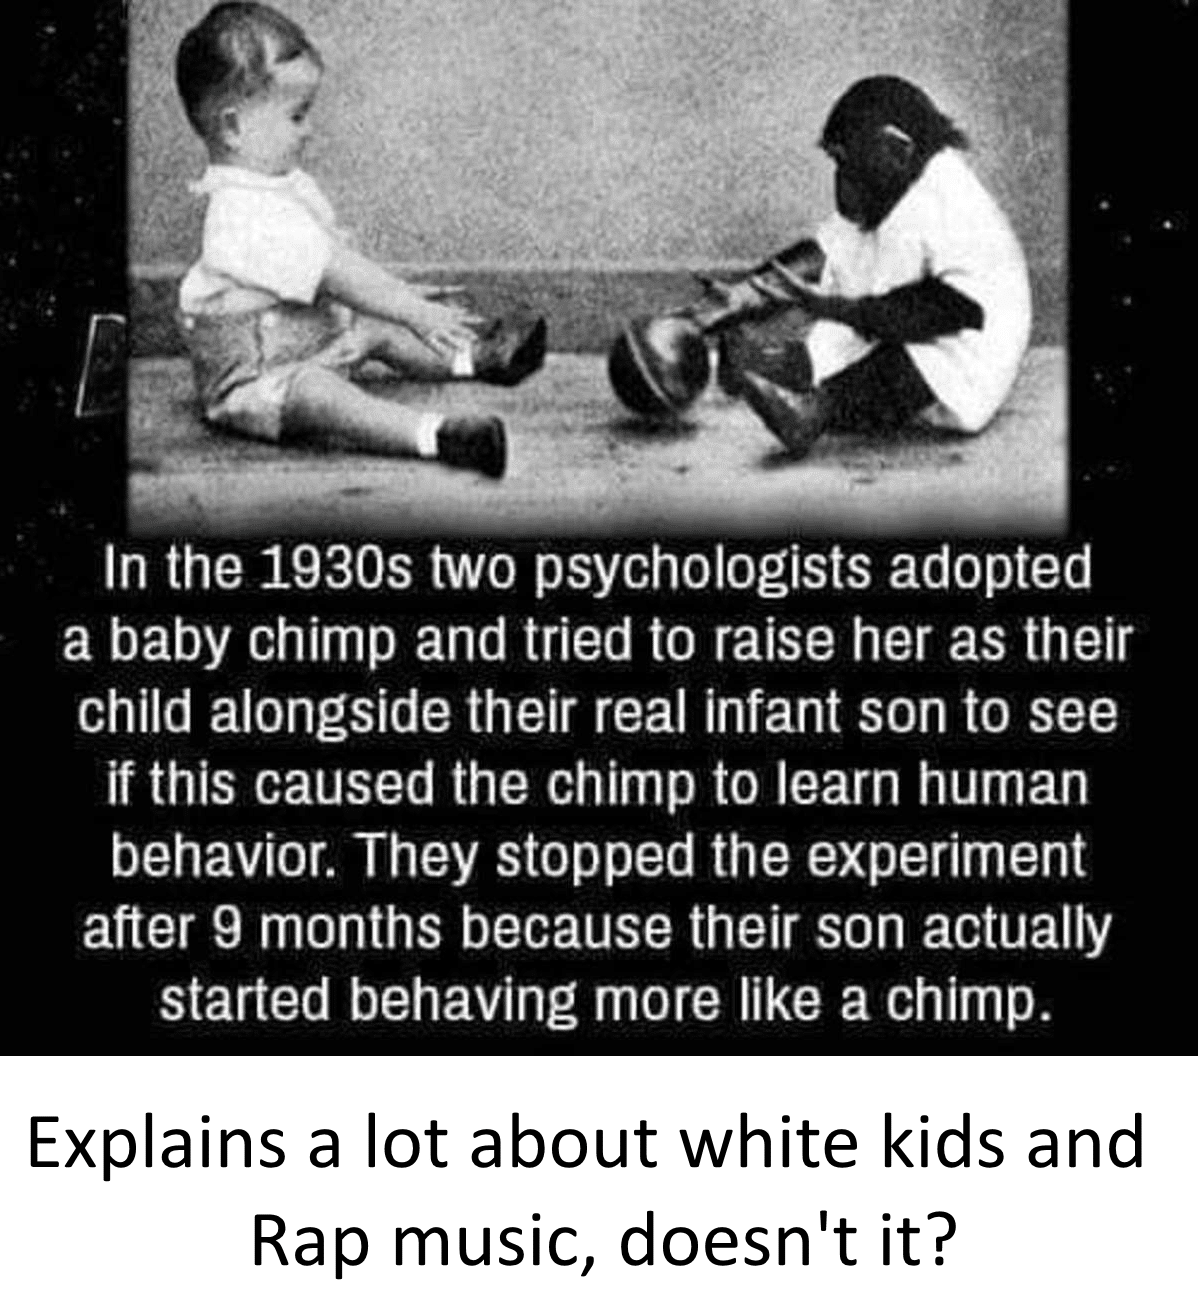 political boomer-memes political text: In the 1930s two psychologists adopted a baby chimp and tried to raise her as their child alongside their real infant son to see if this caused the chimp to learn human behavior. They stopped the experiment after 9 months because their son actually started behaving more like a chimp. Explains a lot about white kids and Rap music, doesn't it? 